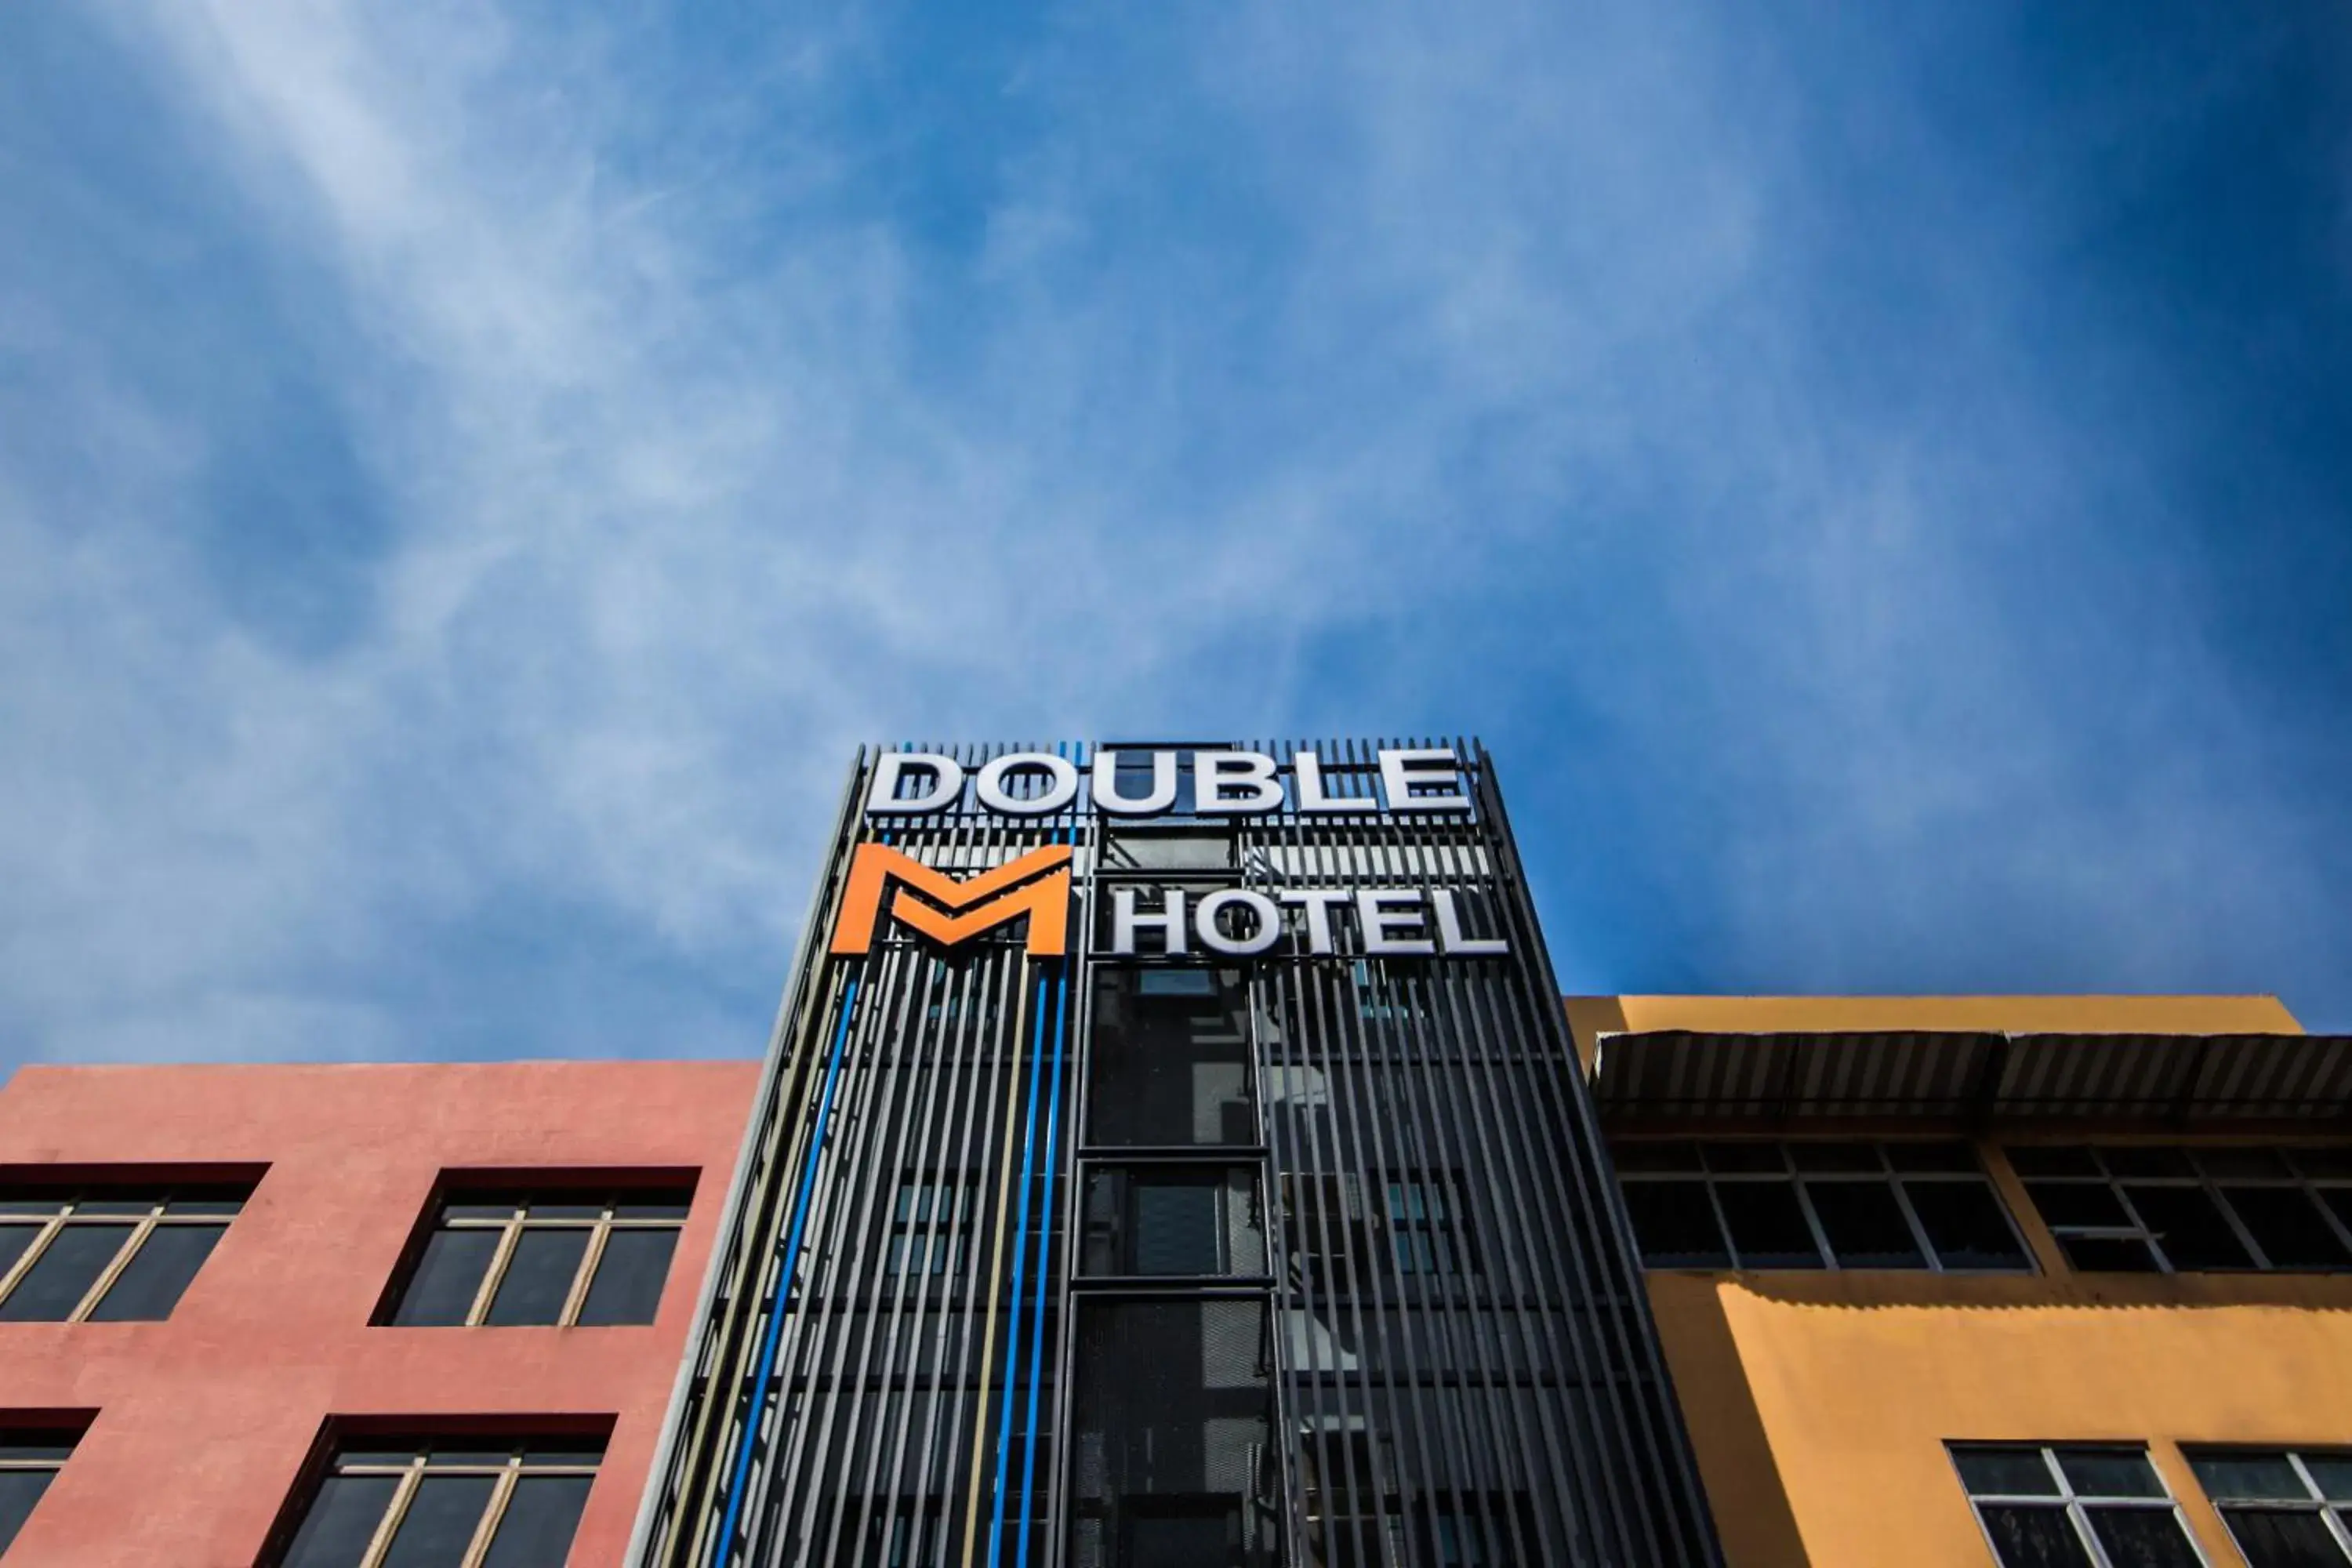 Property Building in Double M Hotel @ Kl Sentral